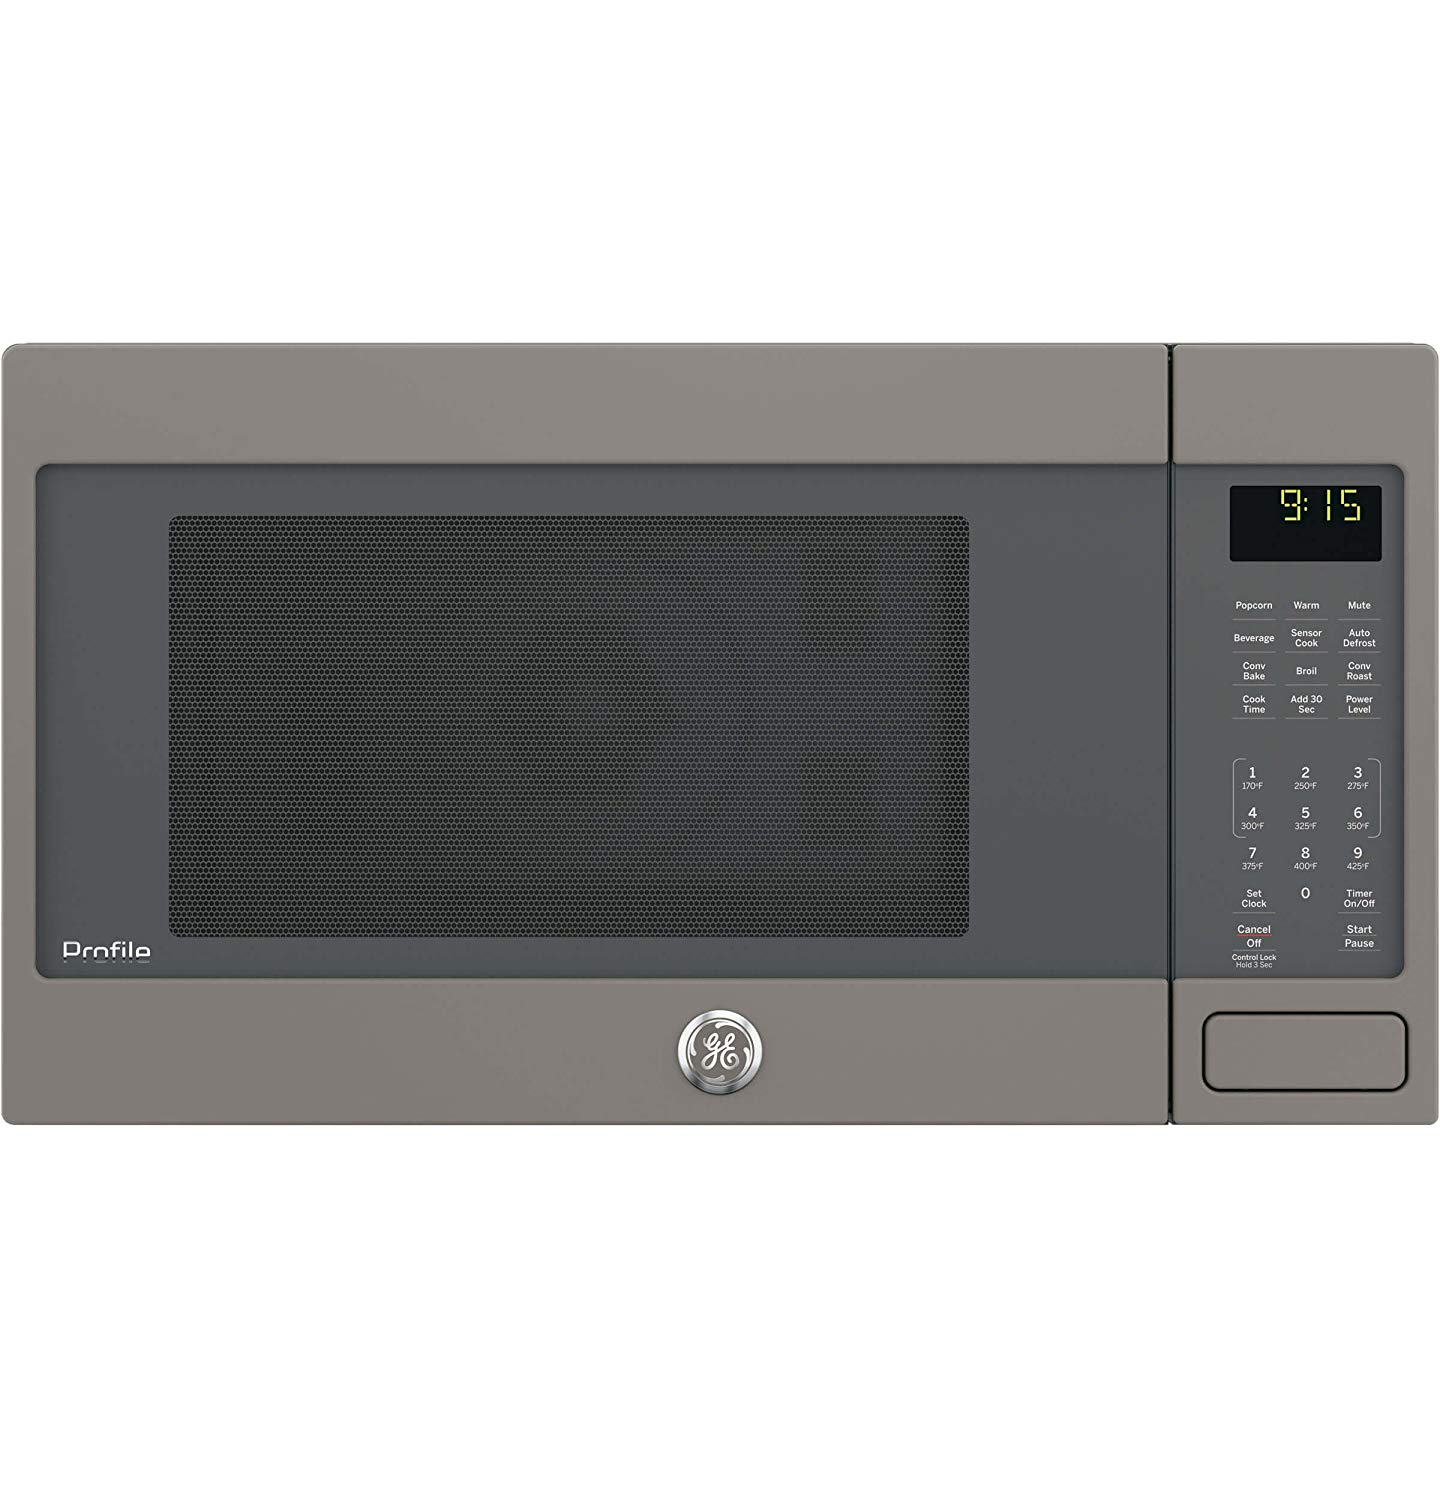 GE PEB9159EJES Microwave Oven